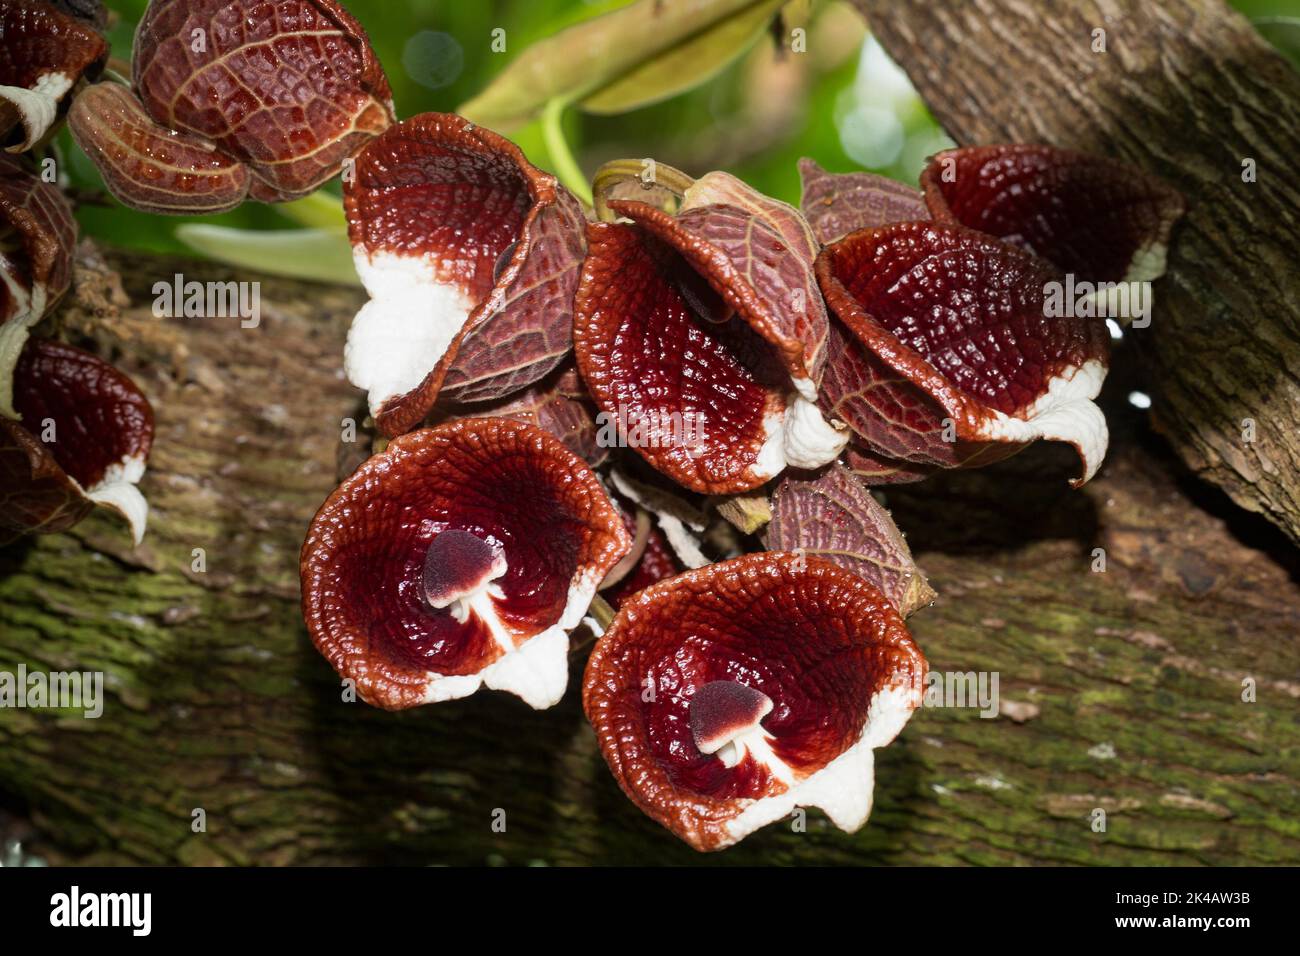 Tree-like pipe flower some brown-red white flowers on tree trunk Stock Photo